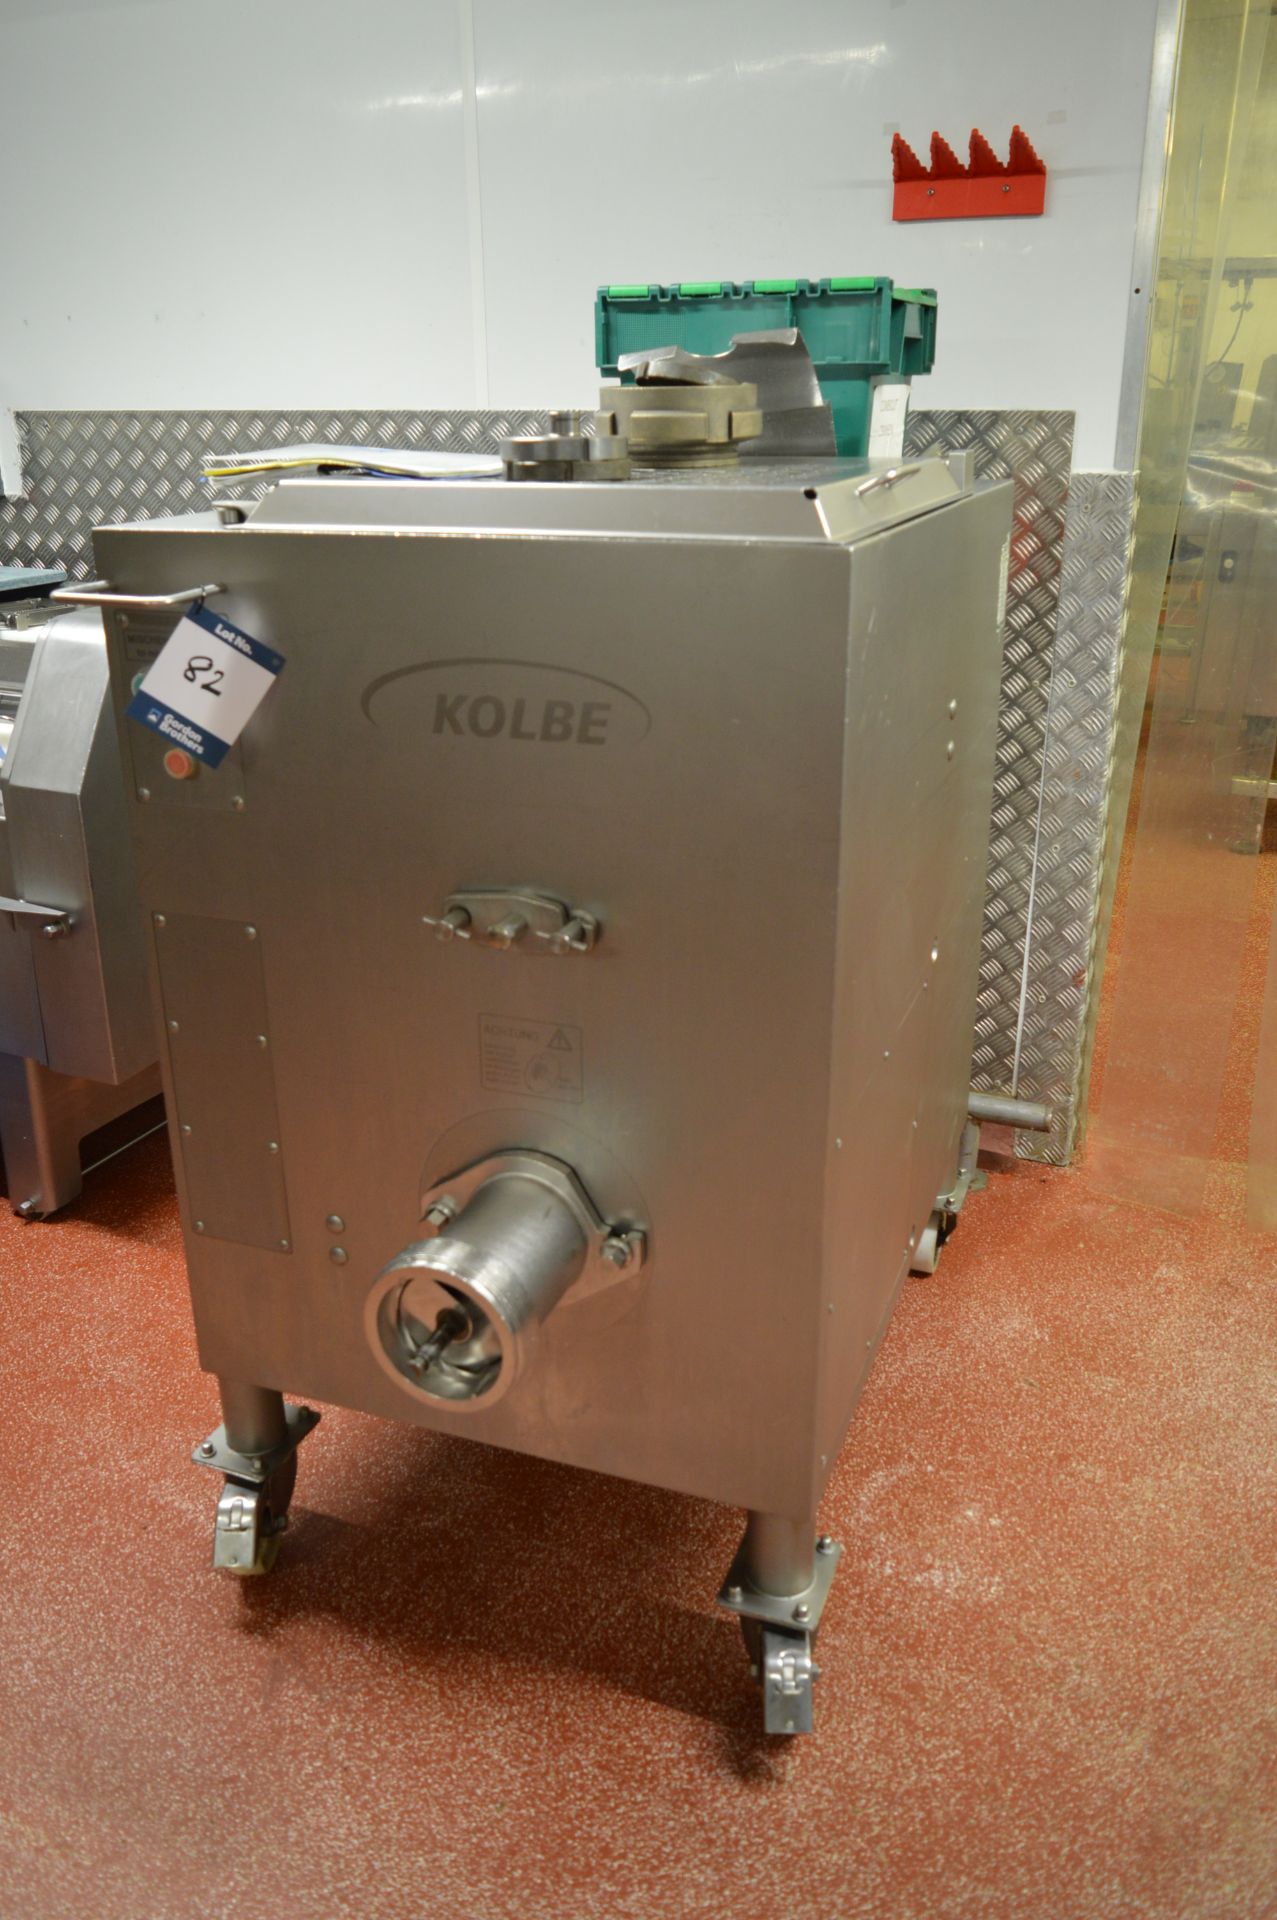 Kolbe, Type MWE52 mincer, Serial No. 1200875 (2009) (Located at Crantock Bakery, Newquay)